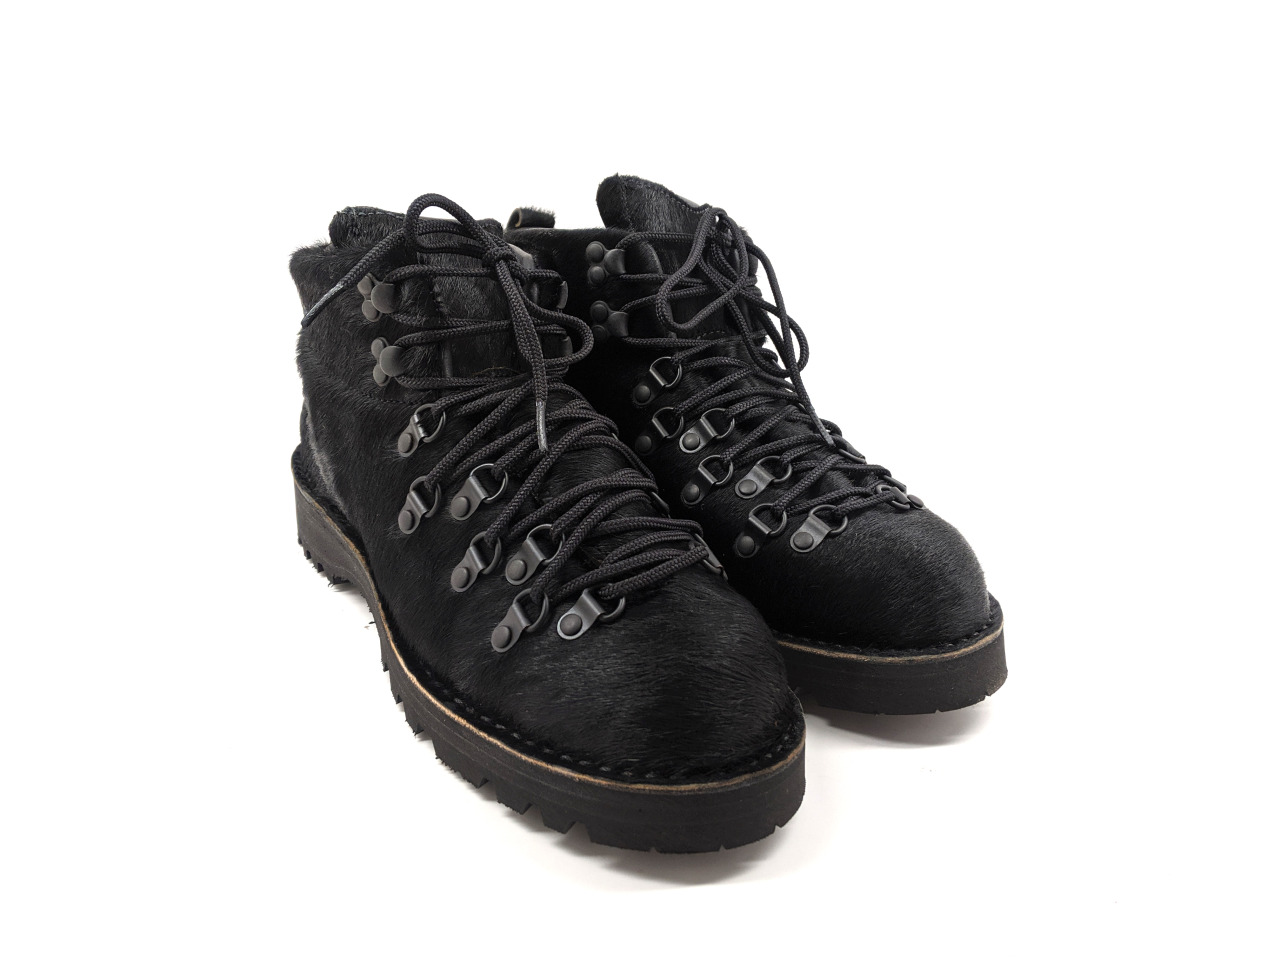 NEPENTHES NEW YORK — 「SPECIAL RELEASE」Danner x Engineered 